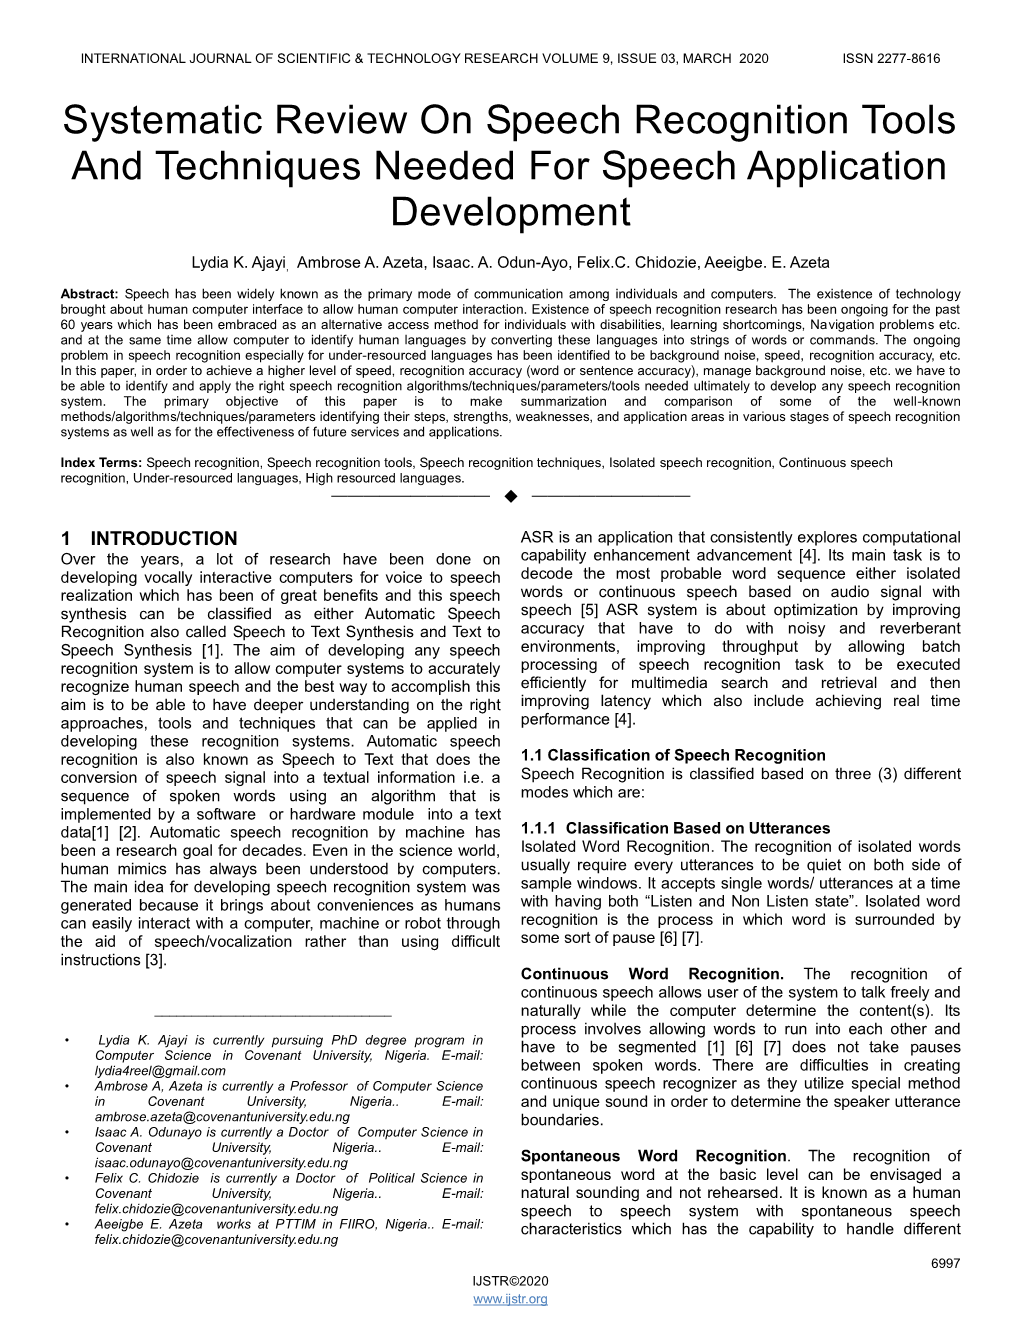 Systematic Review on Speech Recognition Tools and Techniques Needed for Speech Application Development